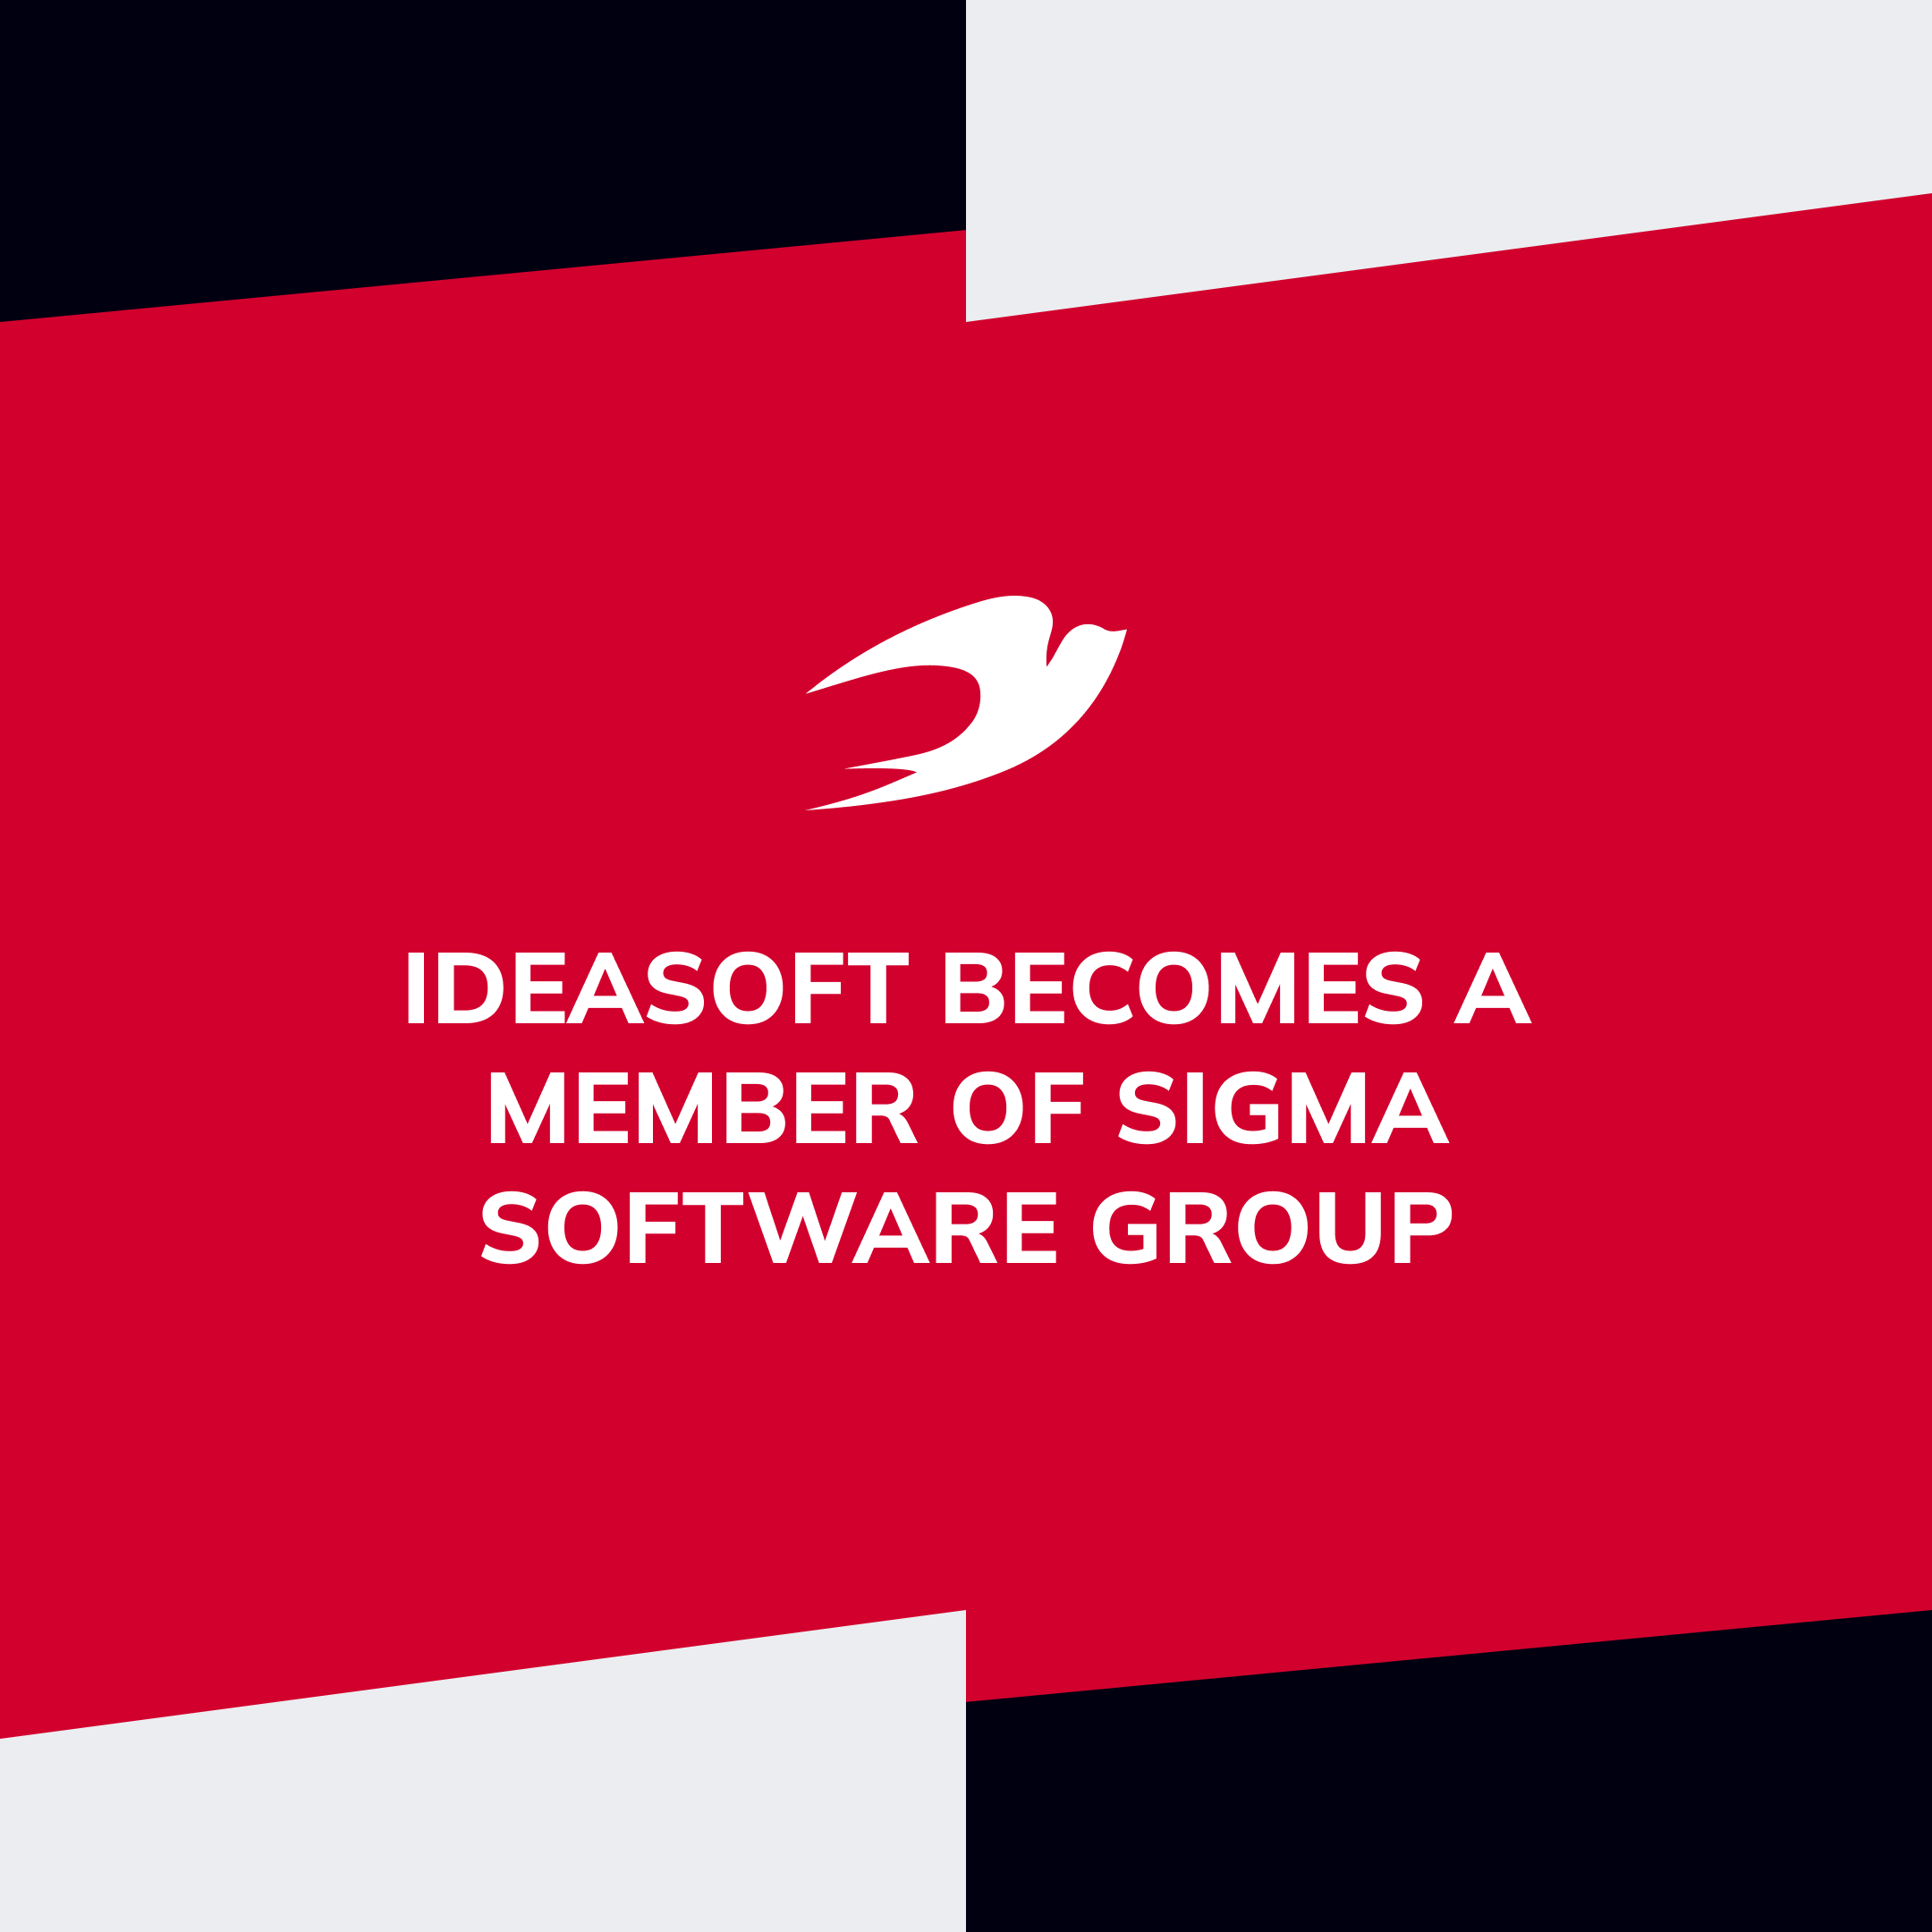 IdeaSoft Becomes a Member of Sigma Software Group